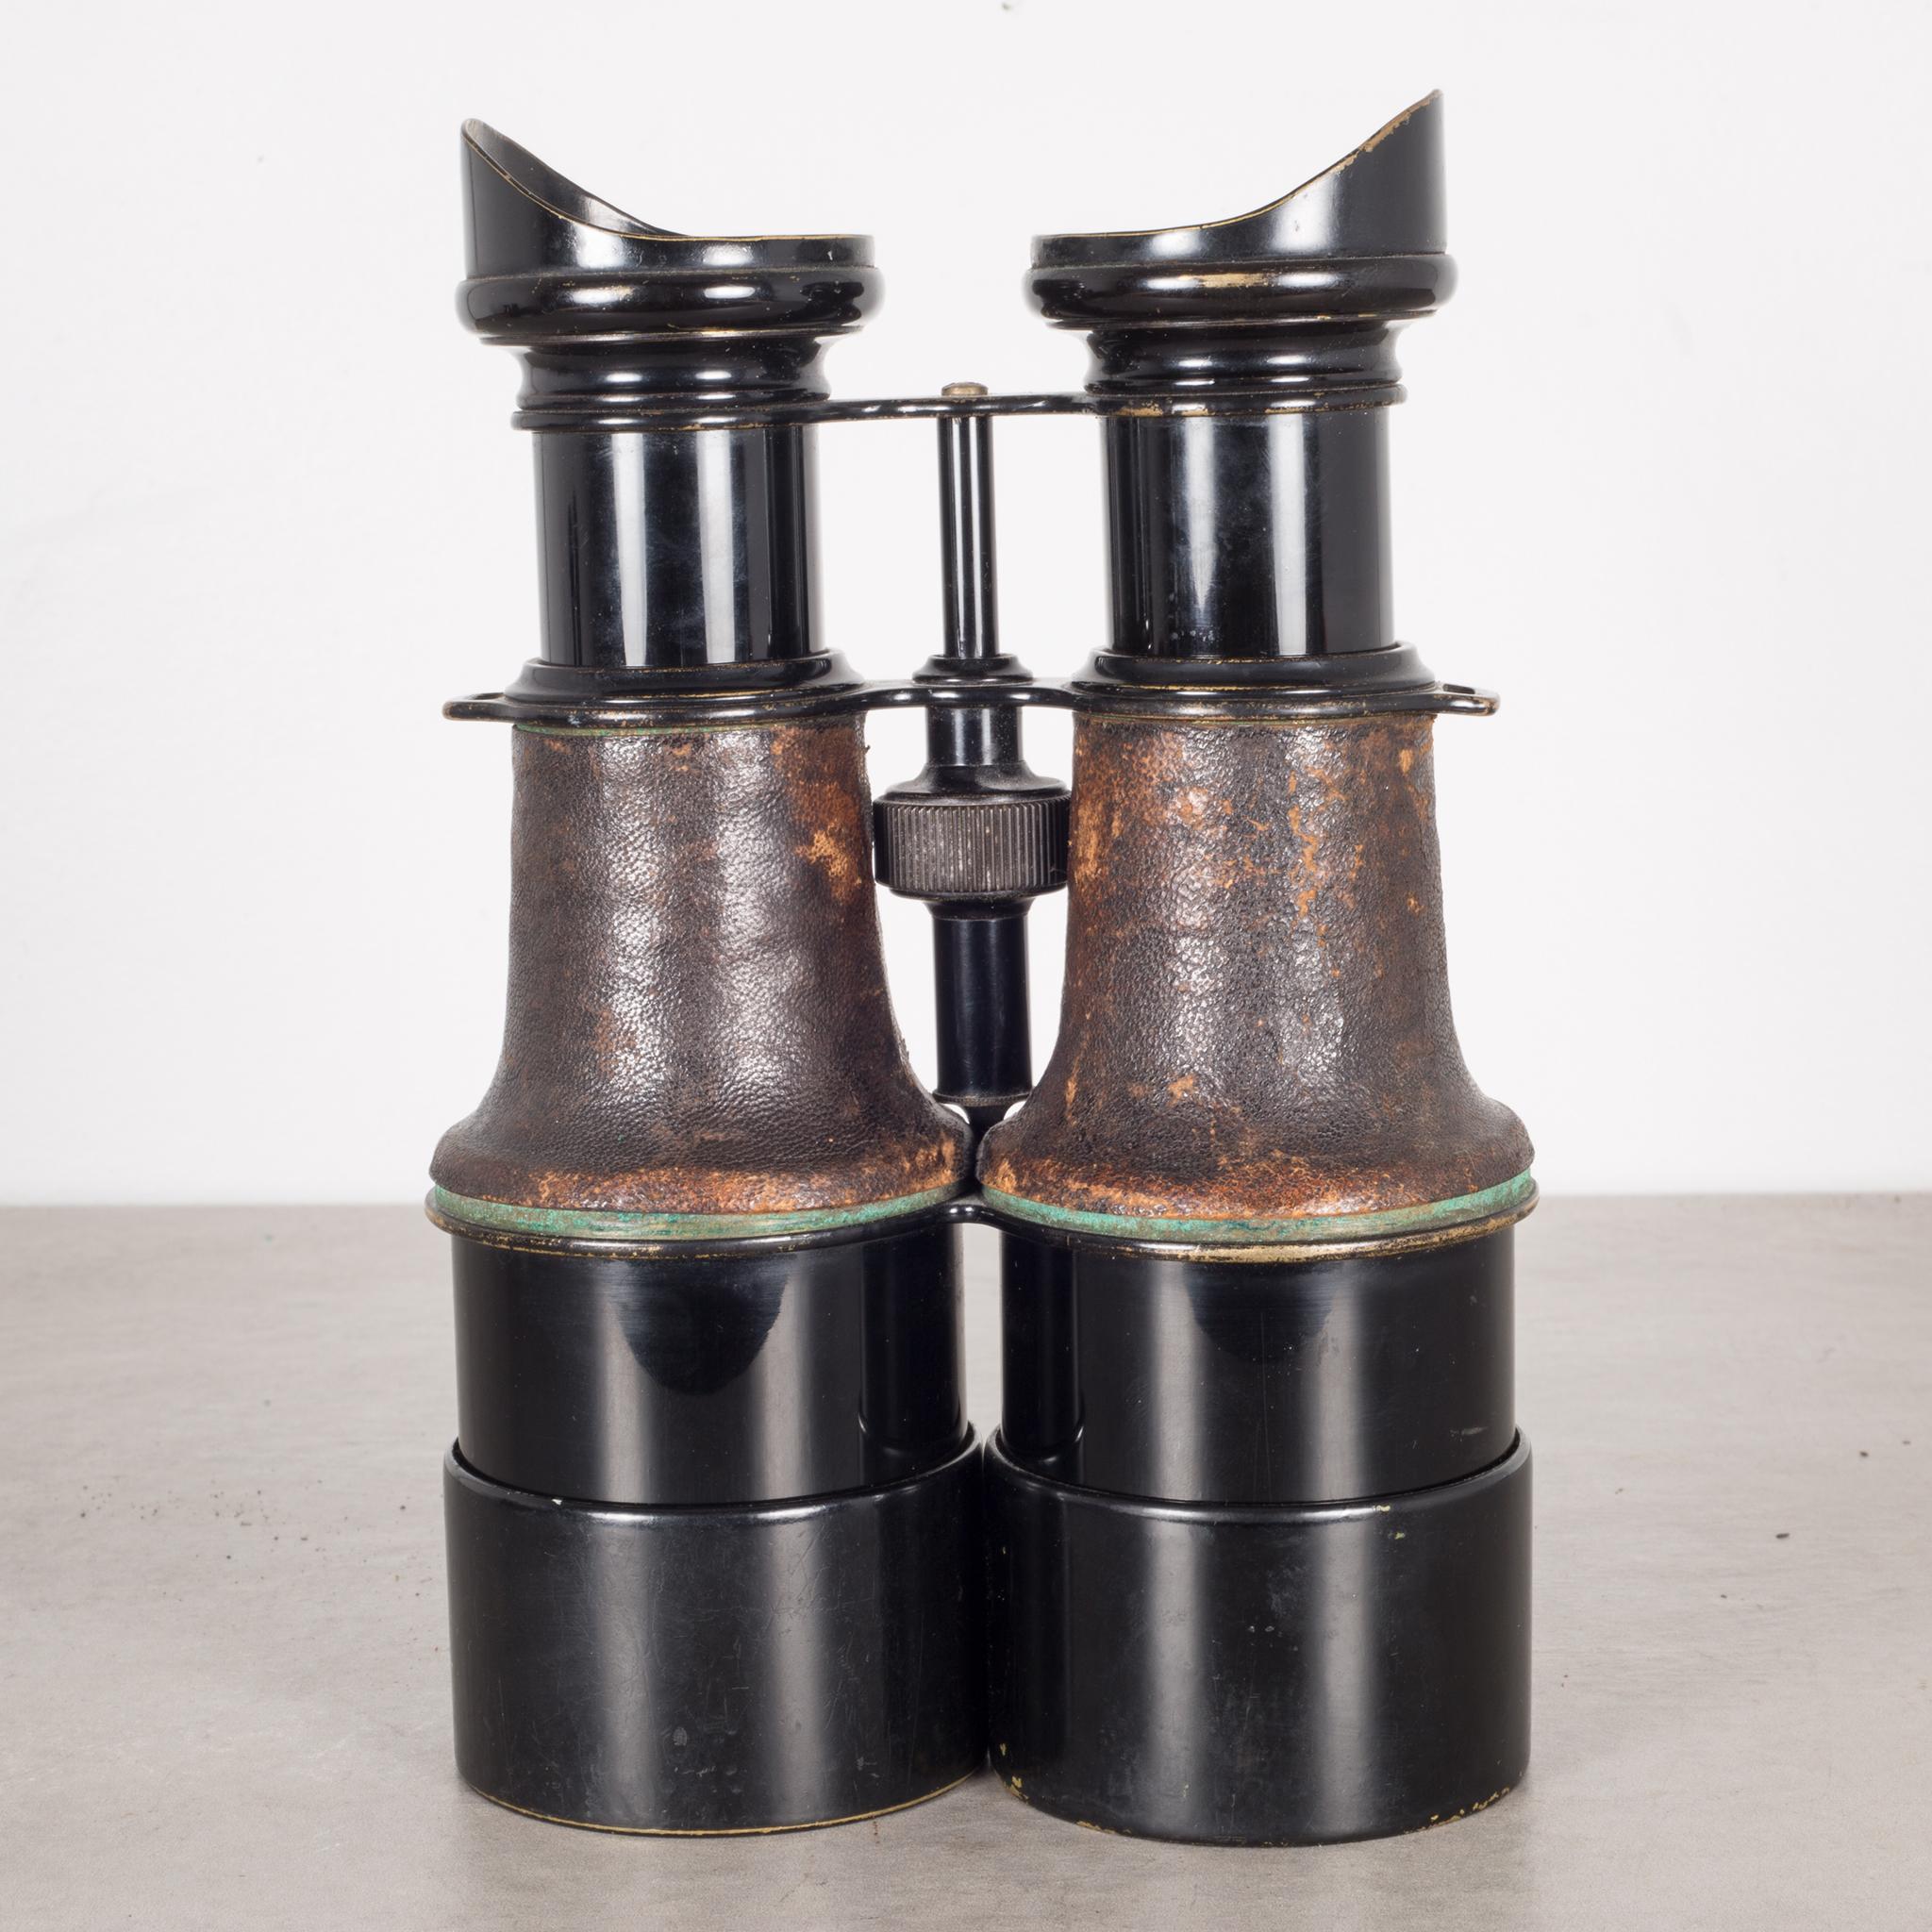 French Expandable Leather Wrapped Maritime Binoculars by Iris, Paris, circa 1880-1915